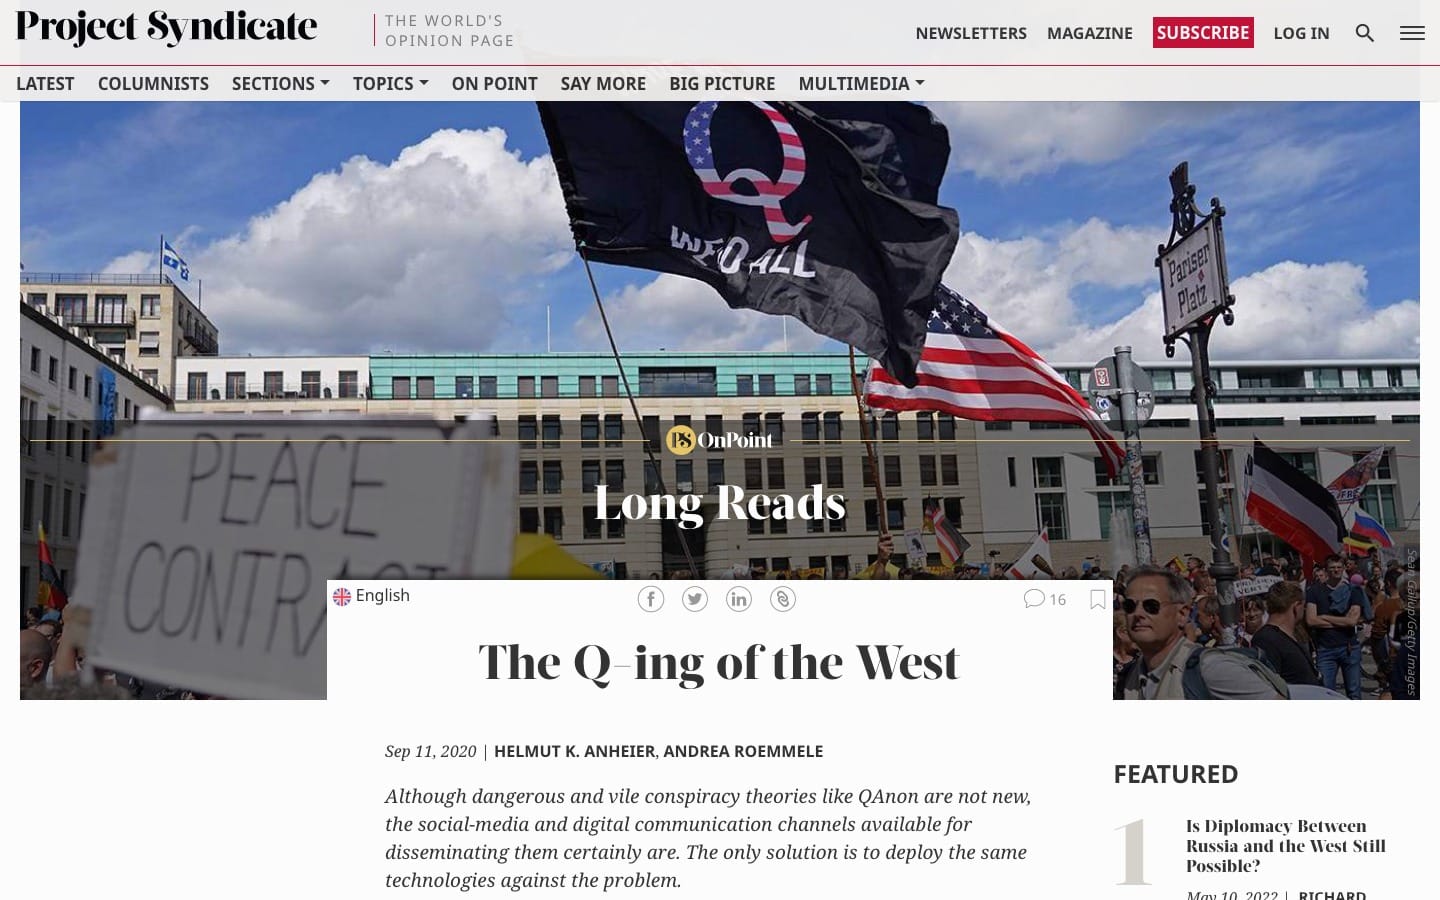 The Q‑ing of the West